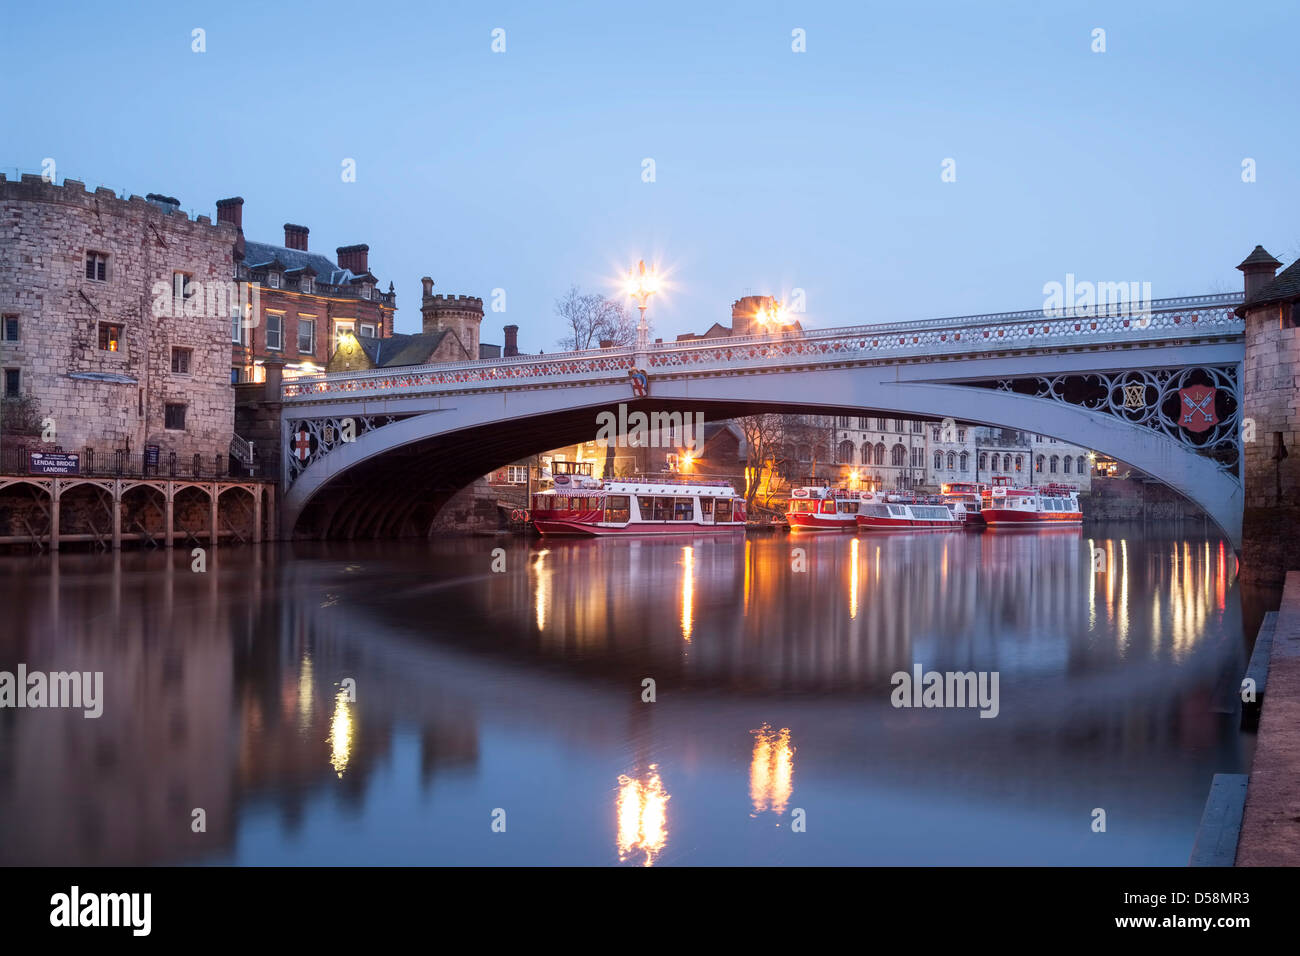 Lendal Bridge over the river Ouse in York, North Yorkshire. Stock Photo